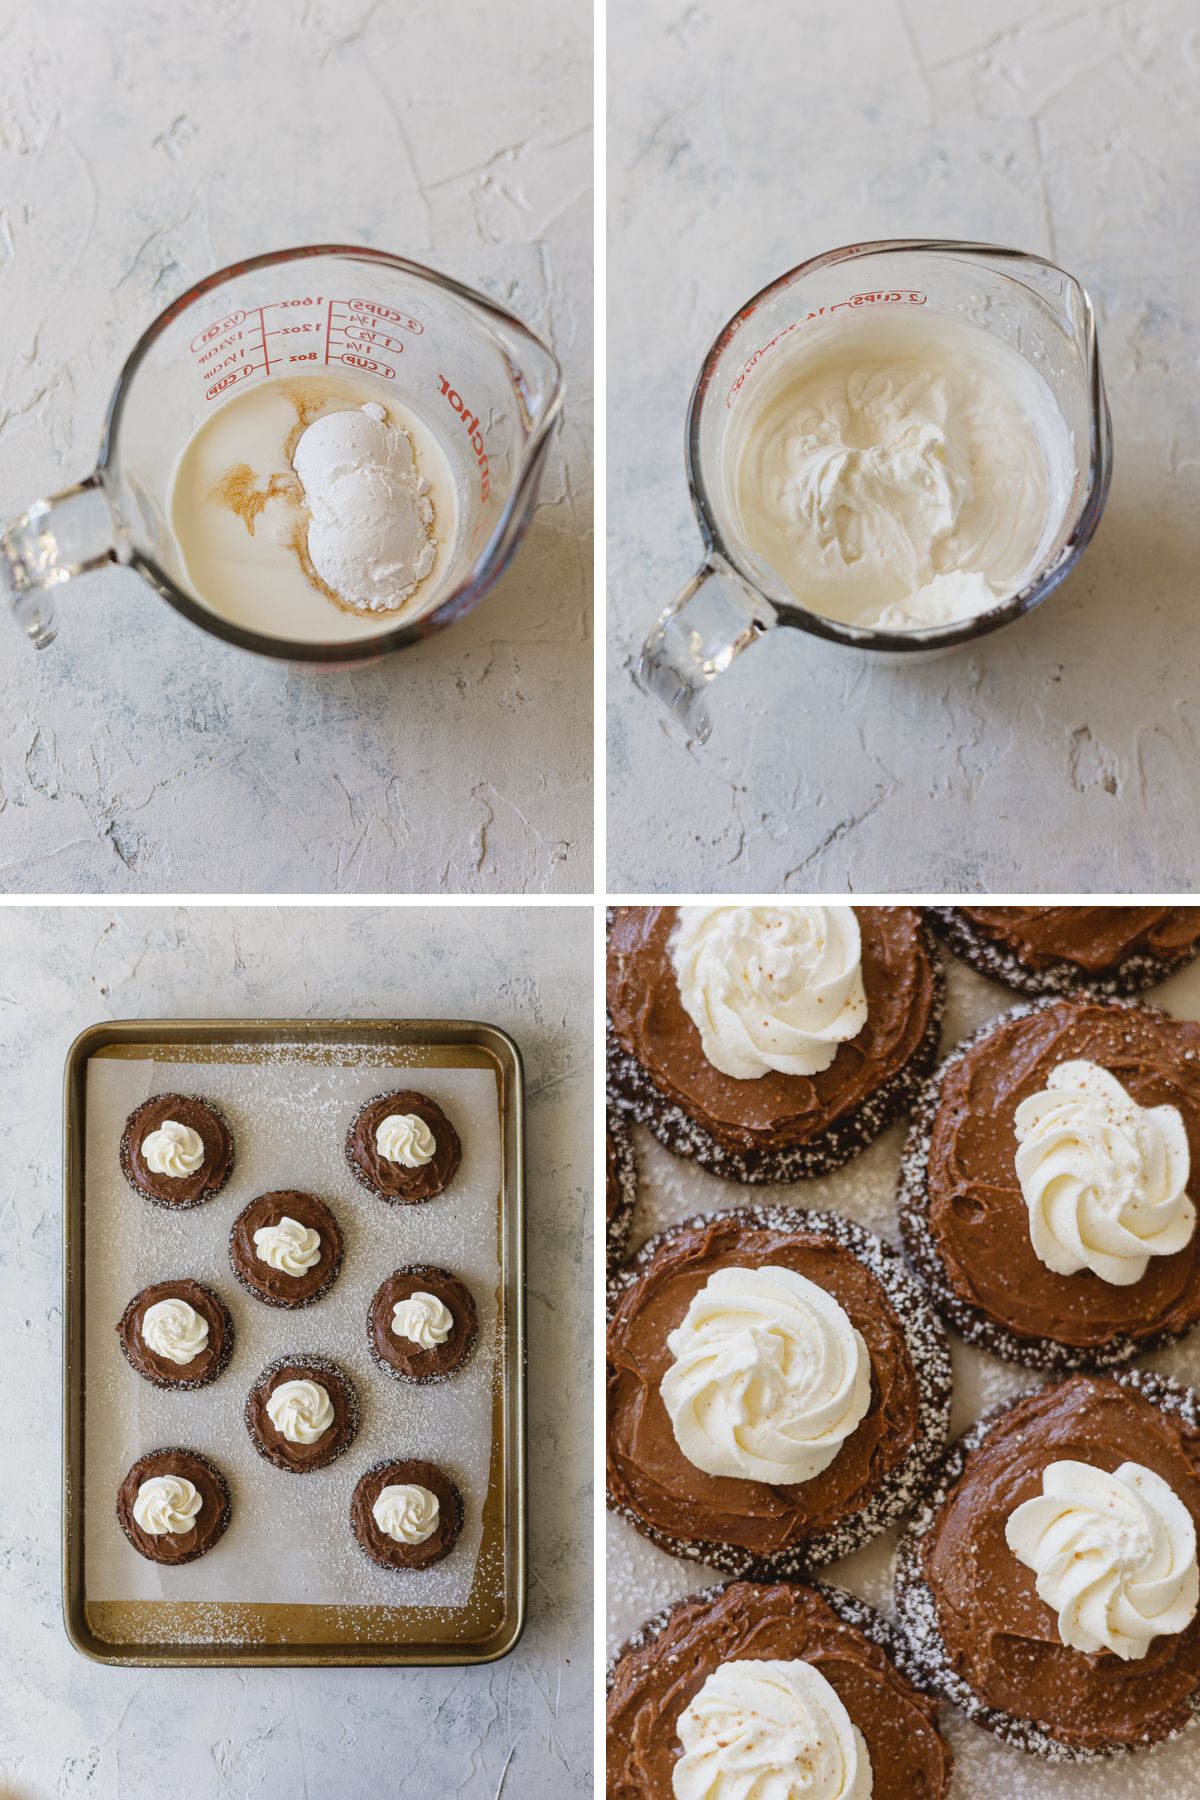 Preparing homemade whipped cream and piping swirls on top of chocolate frosted cookies.